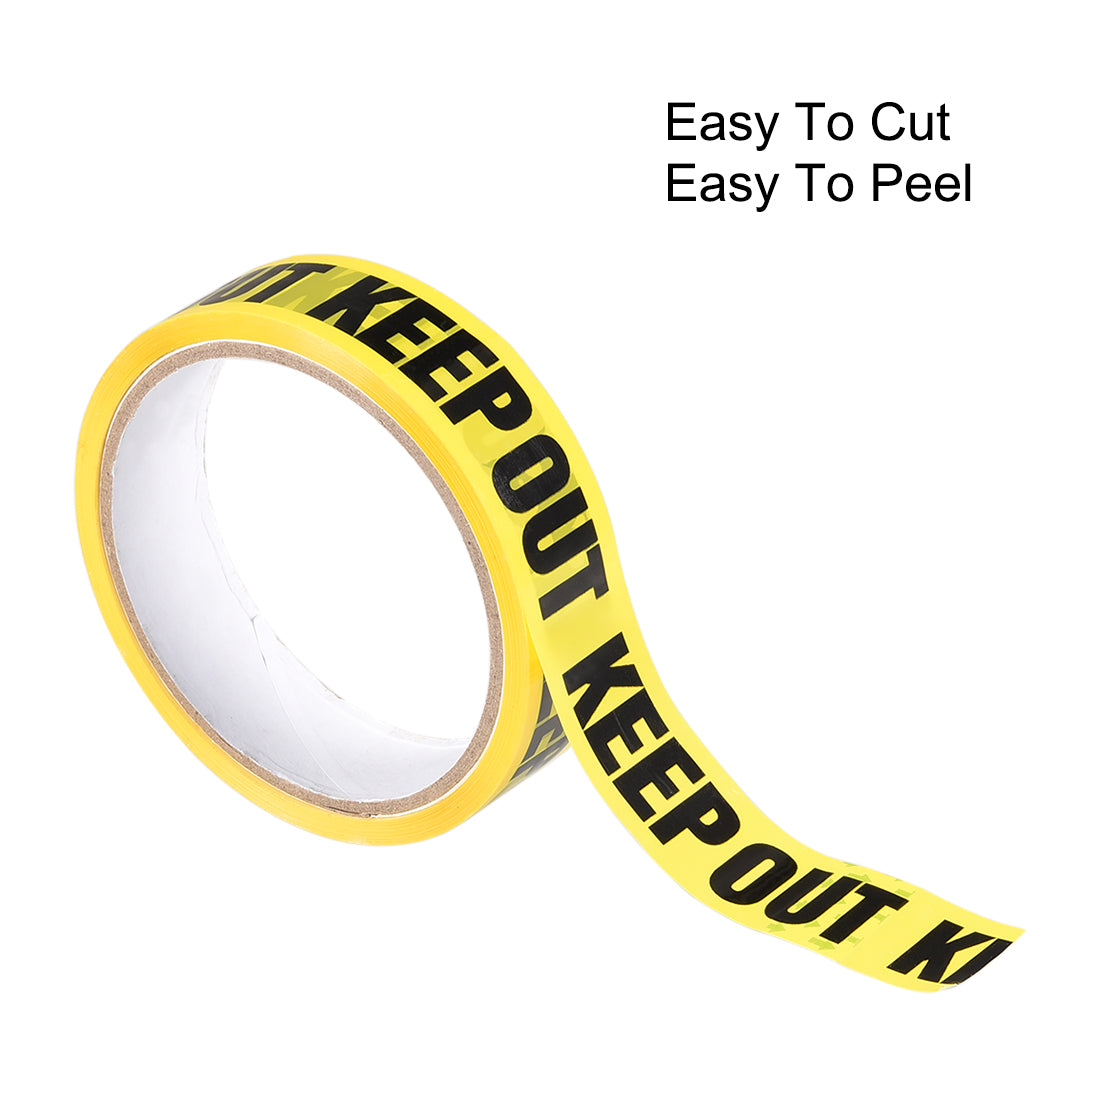 uxcell Uxcell Caution Warning Stripe Sticker Adhesive Tape KEEP OUT Marking, 82 Ft x 1 Inch(LxW), Yellow Black for Workplace Wet Floor Caution 2pcs